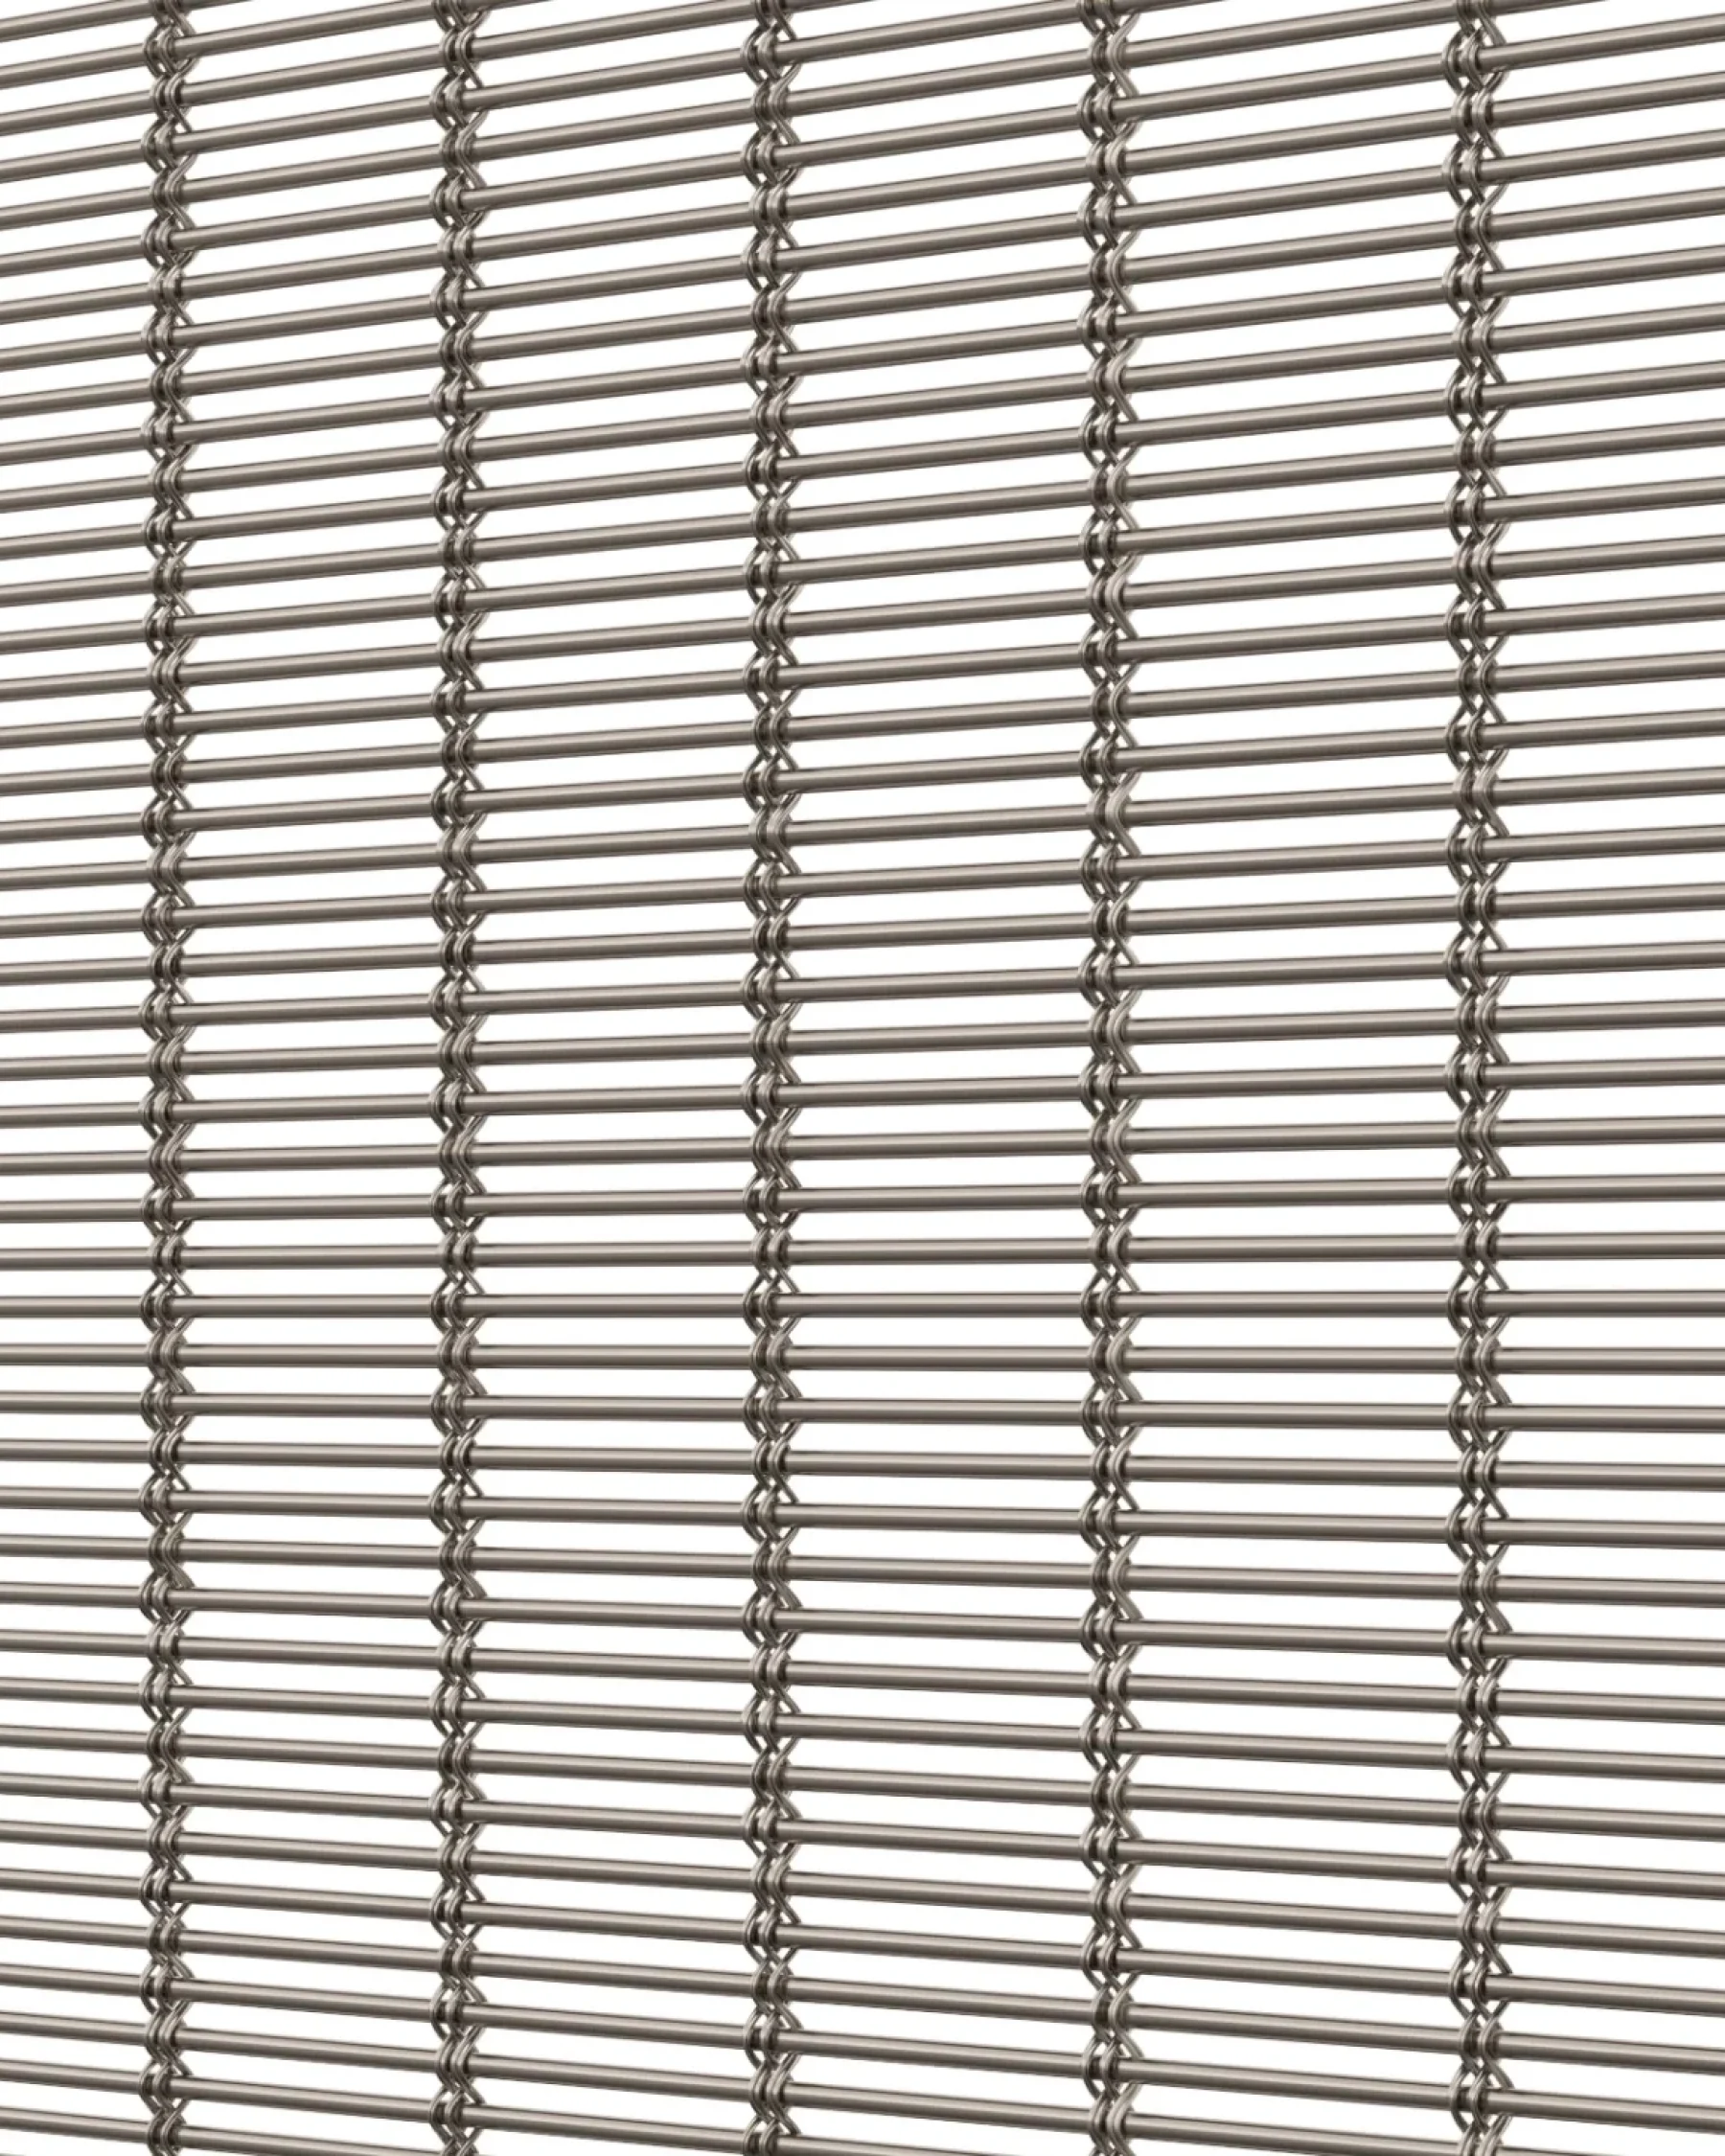 Perspective view of Aalto Mesh model in stainless steel by Codina Architectural. Featuring a woven wire pattern with four cables and one rod, ideal for facades, banisters, and various applications. Offers versatility with multiple material finishes.